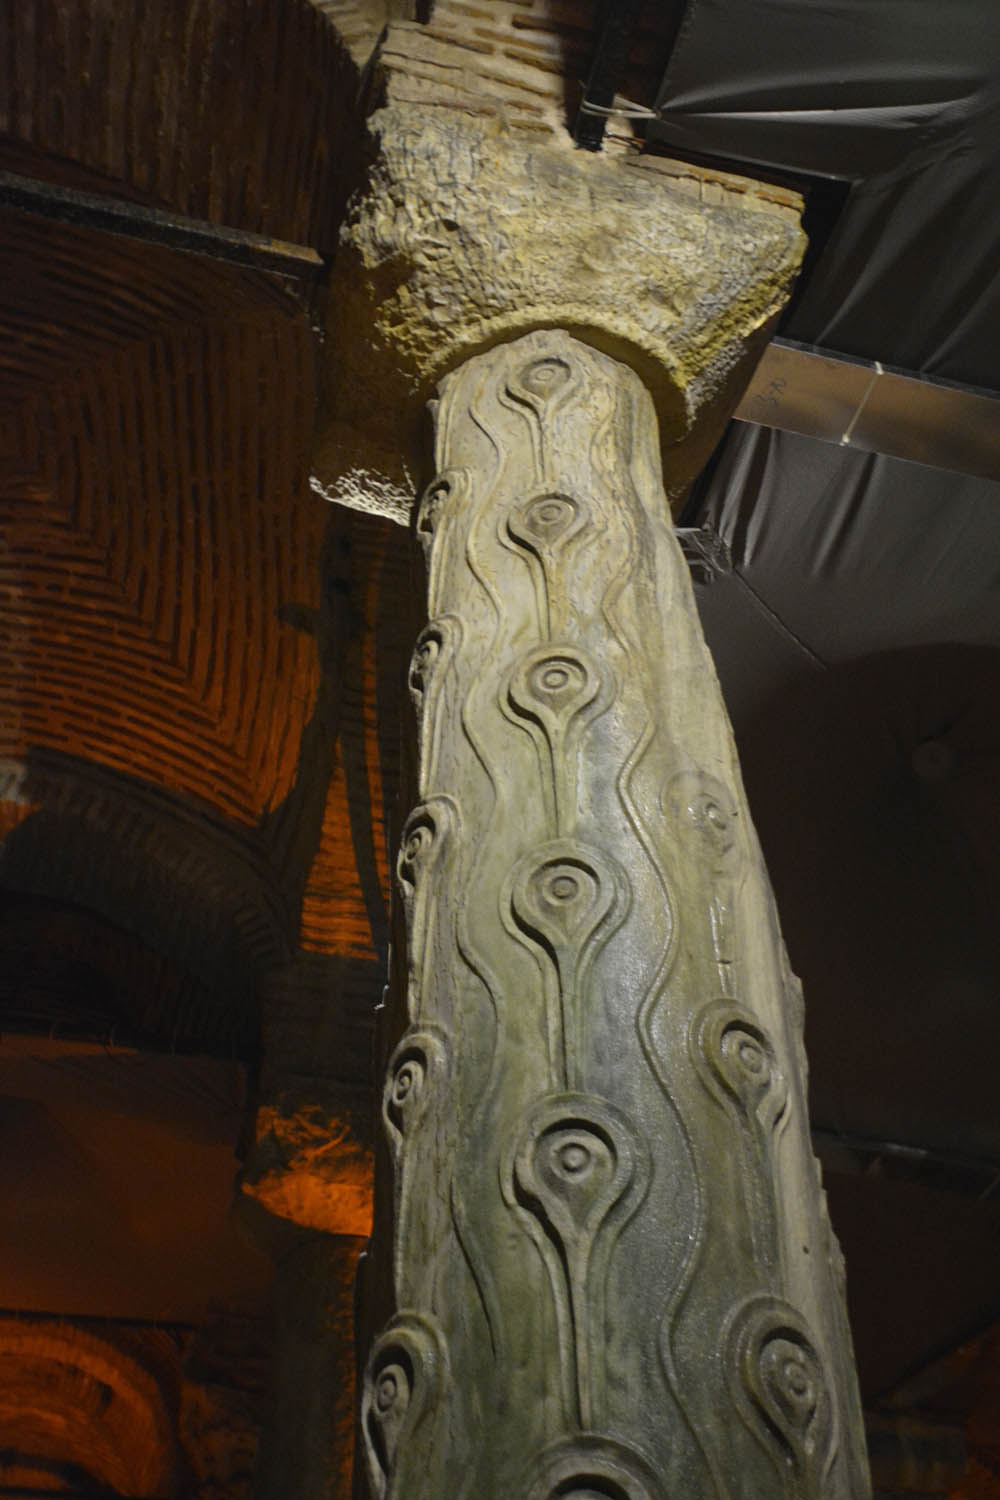 Detail view of a carved column and capital inside the cistern.